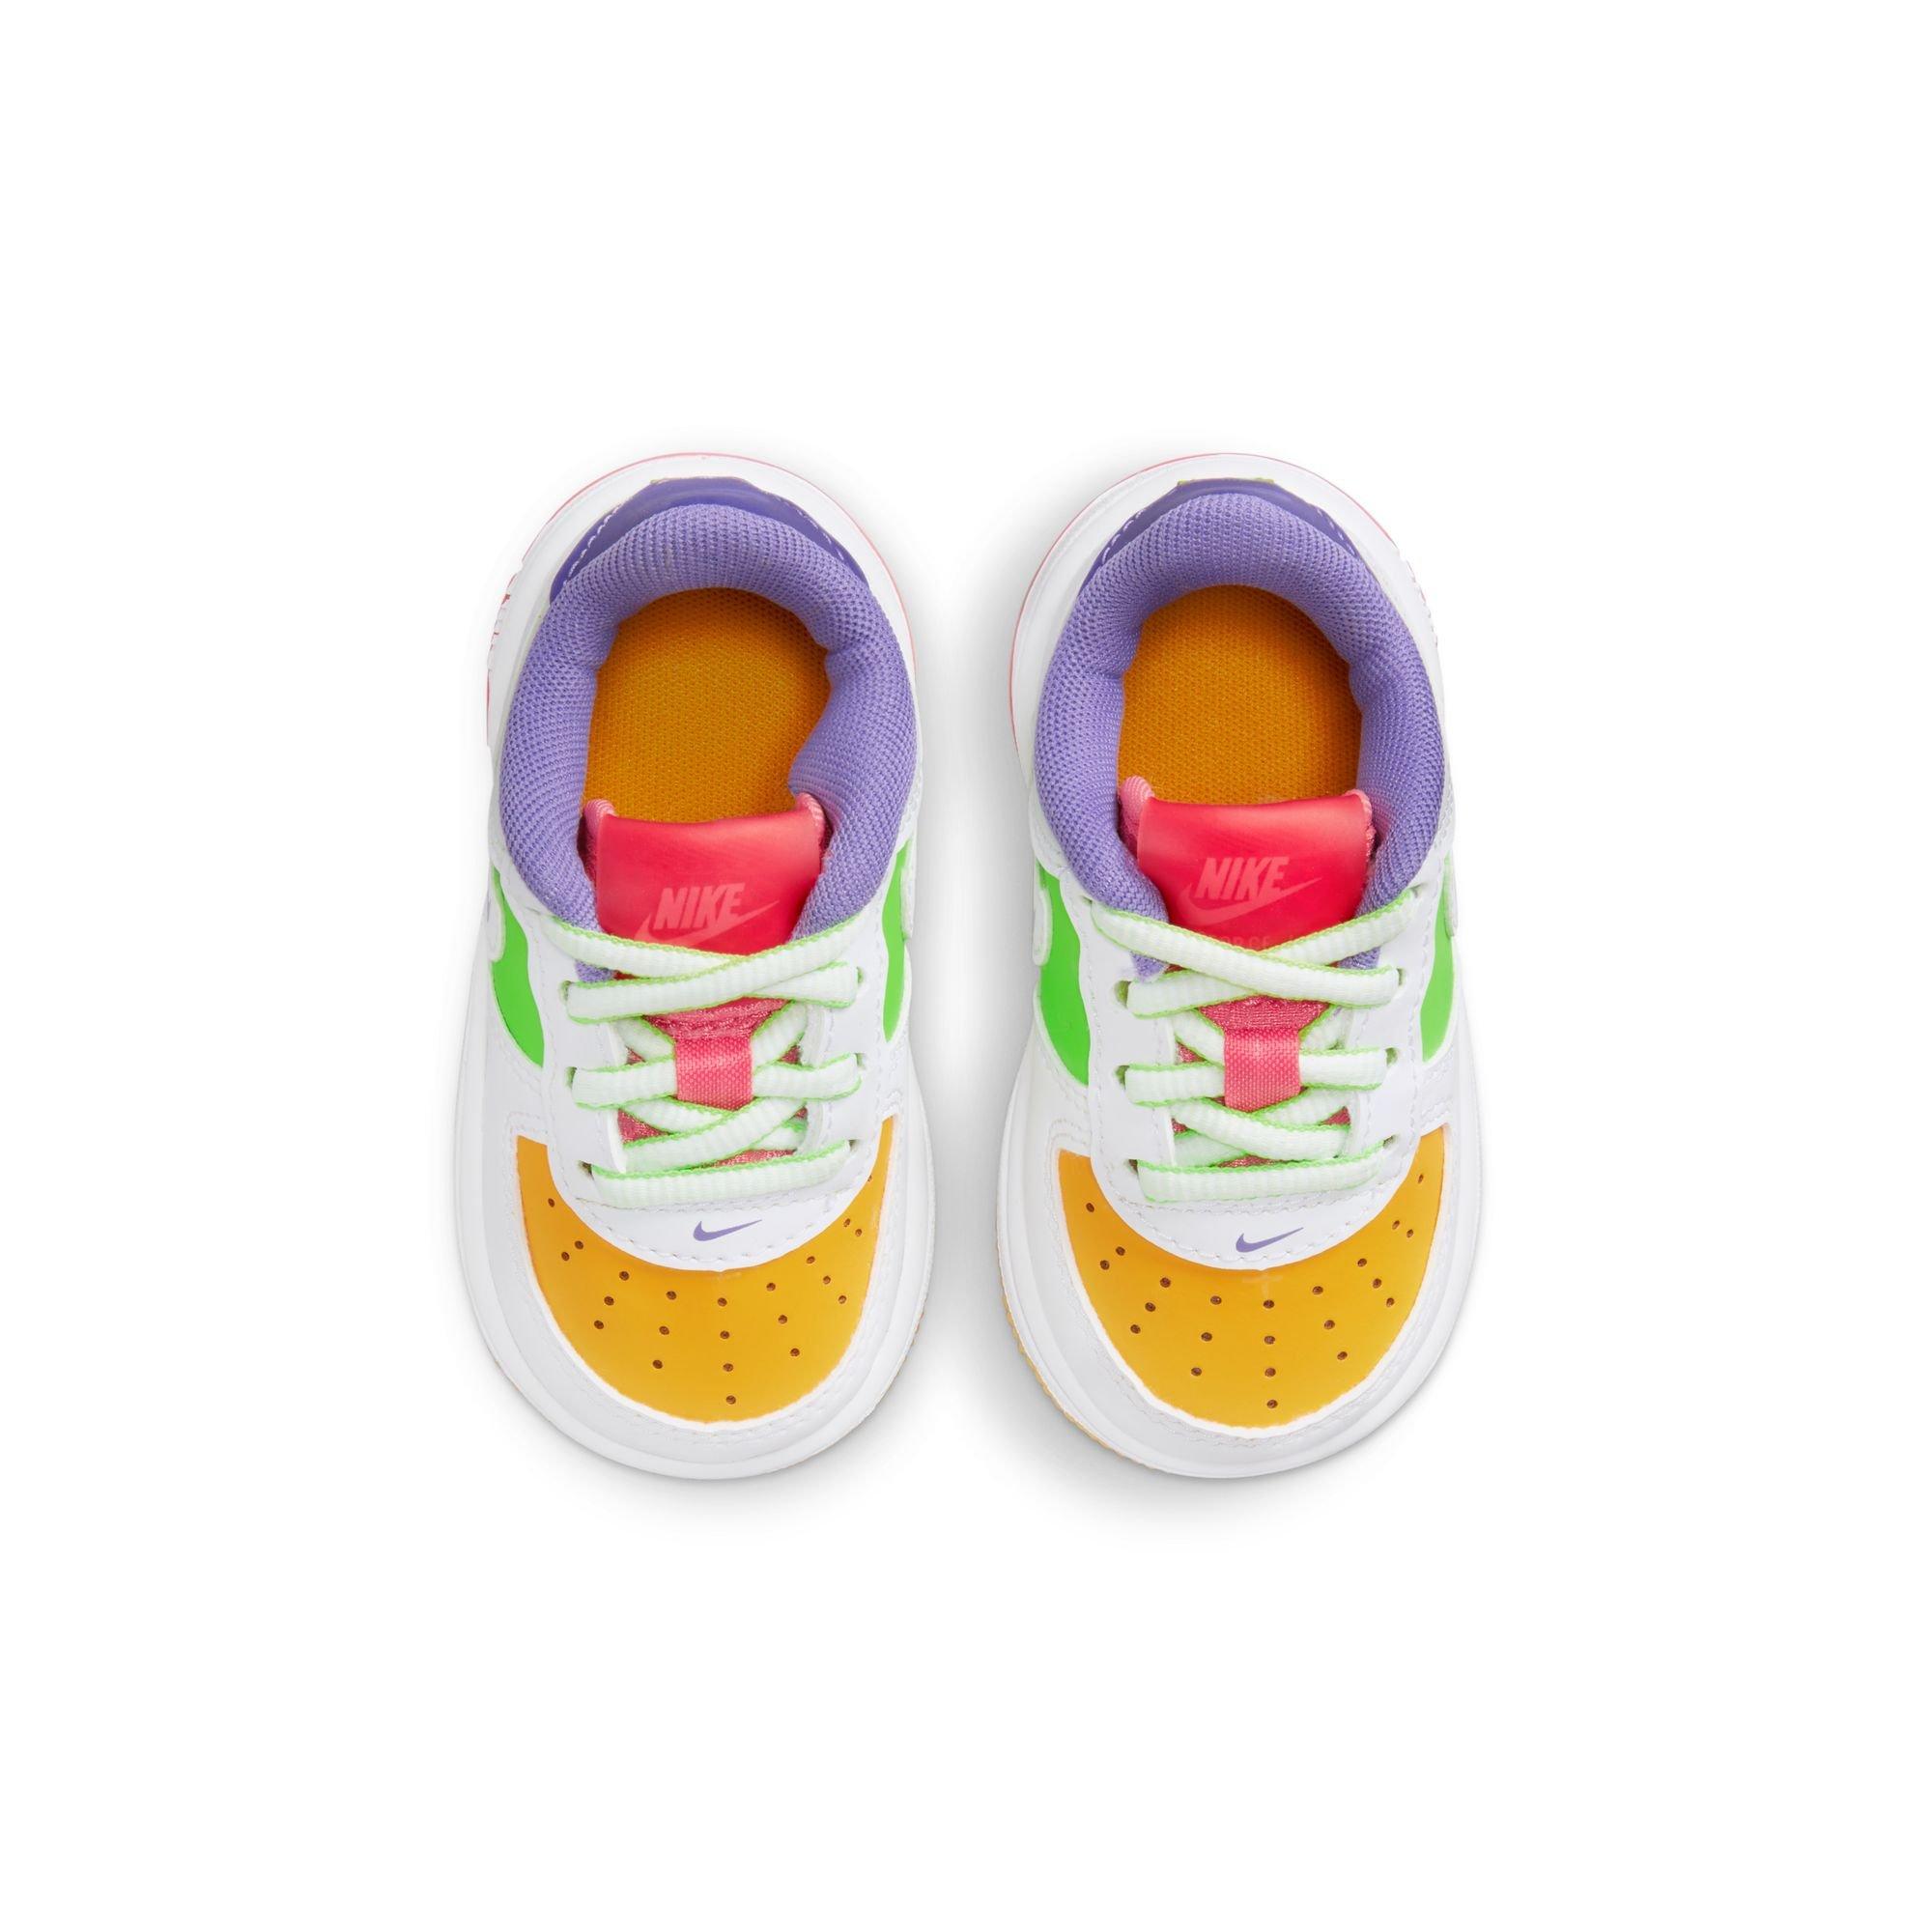 Nike Airforce One LV8 GS What The 90's Kids Purple Orange